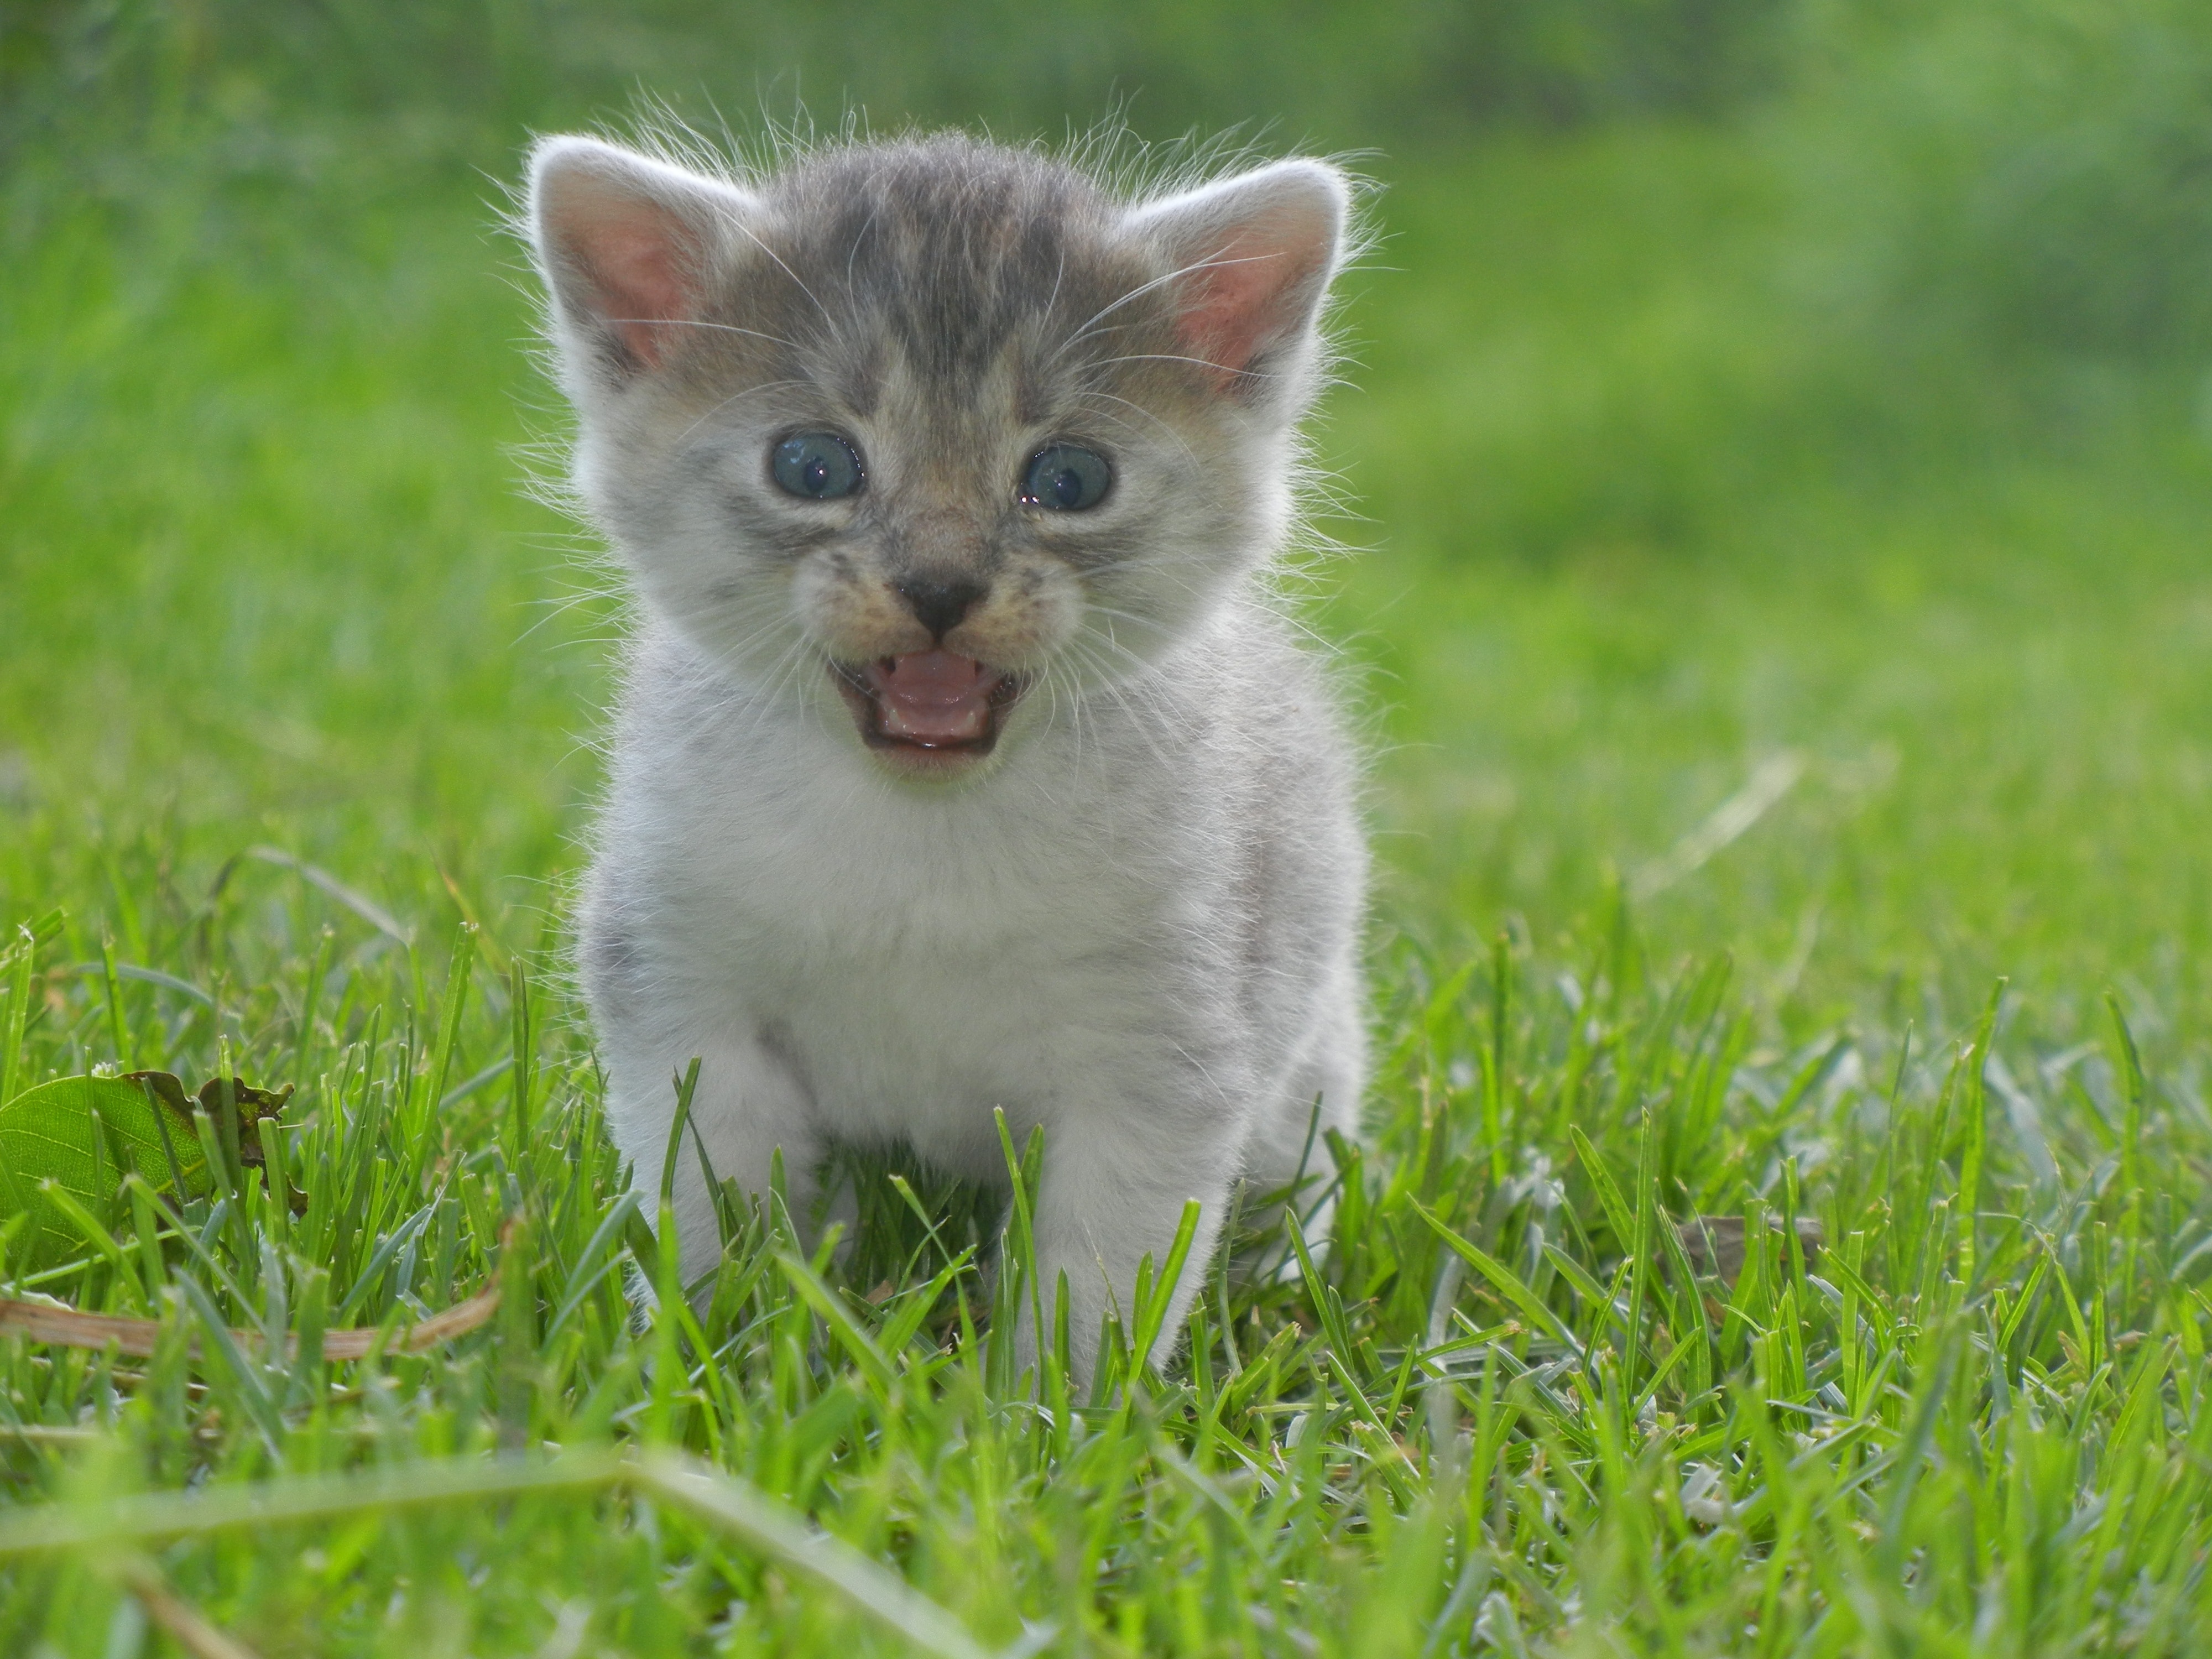 white and gray kitten on grass field during daytime